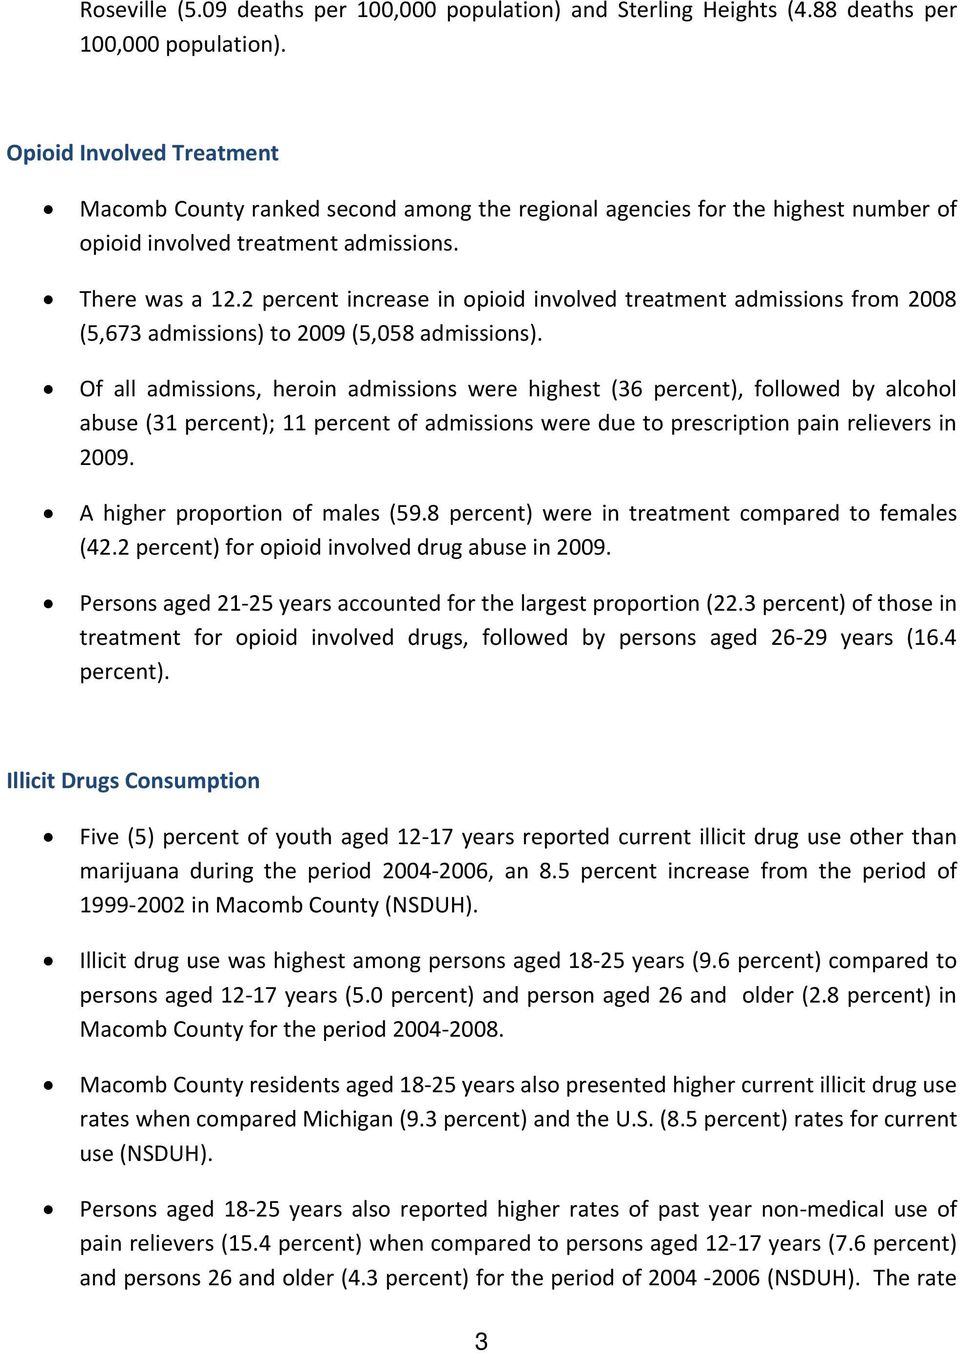 2 percent increase in opioid involved treatment admissions from 2008 (5,673 admissions) to 2009 (5,058 admissions).